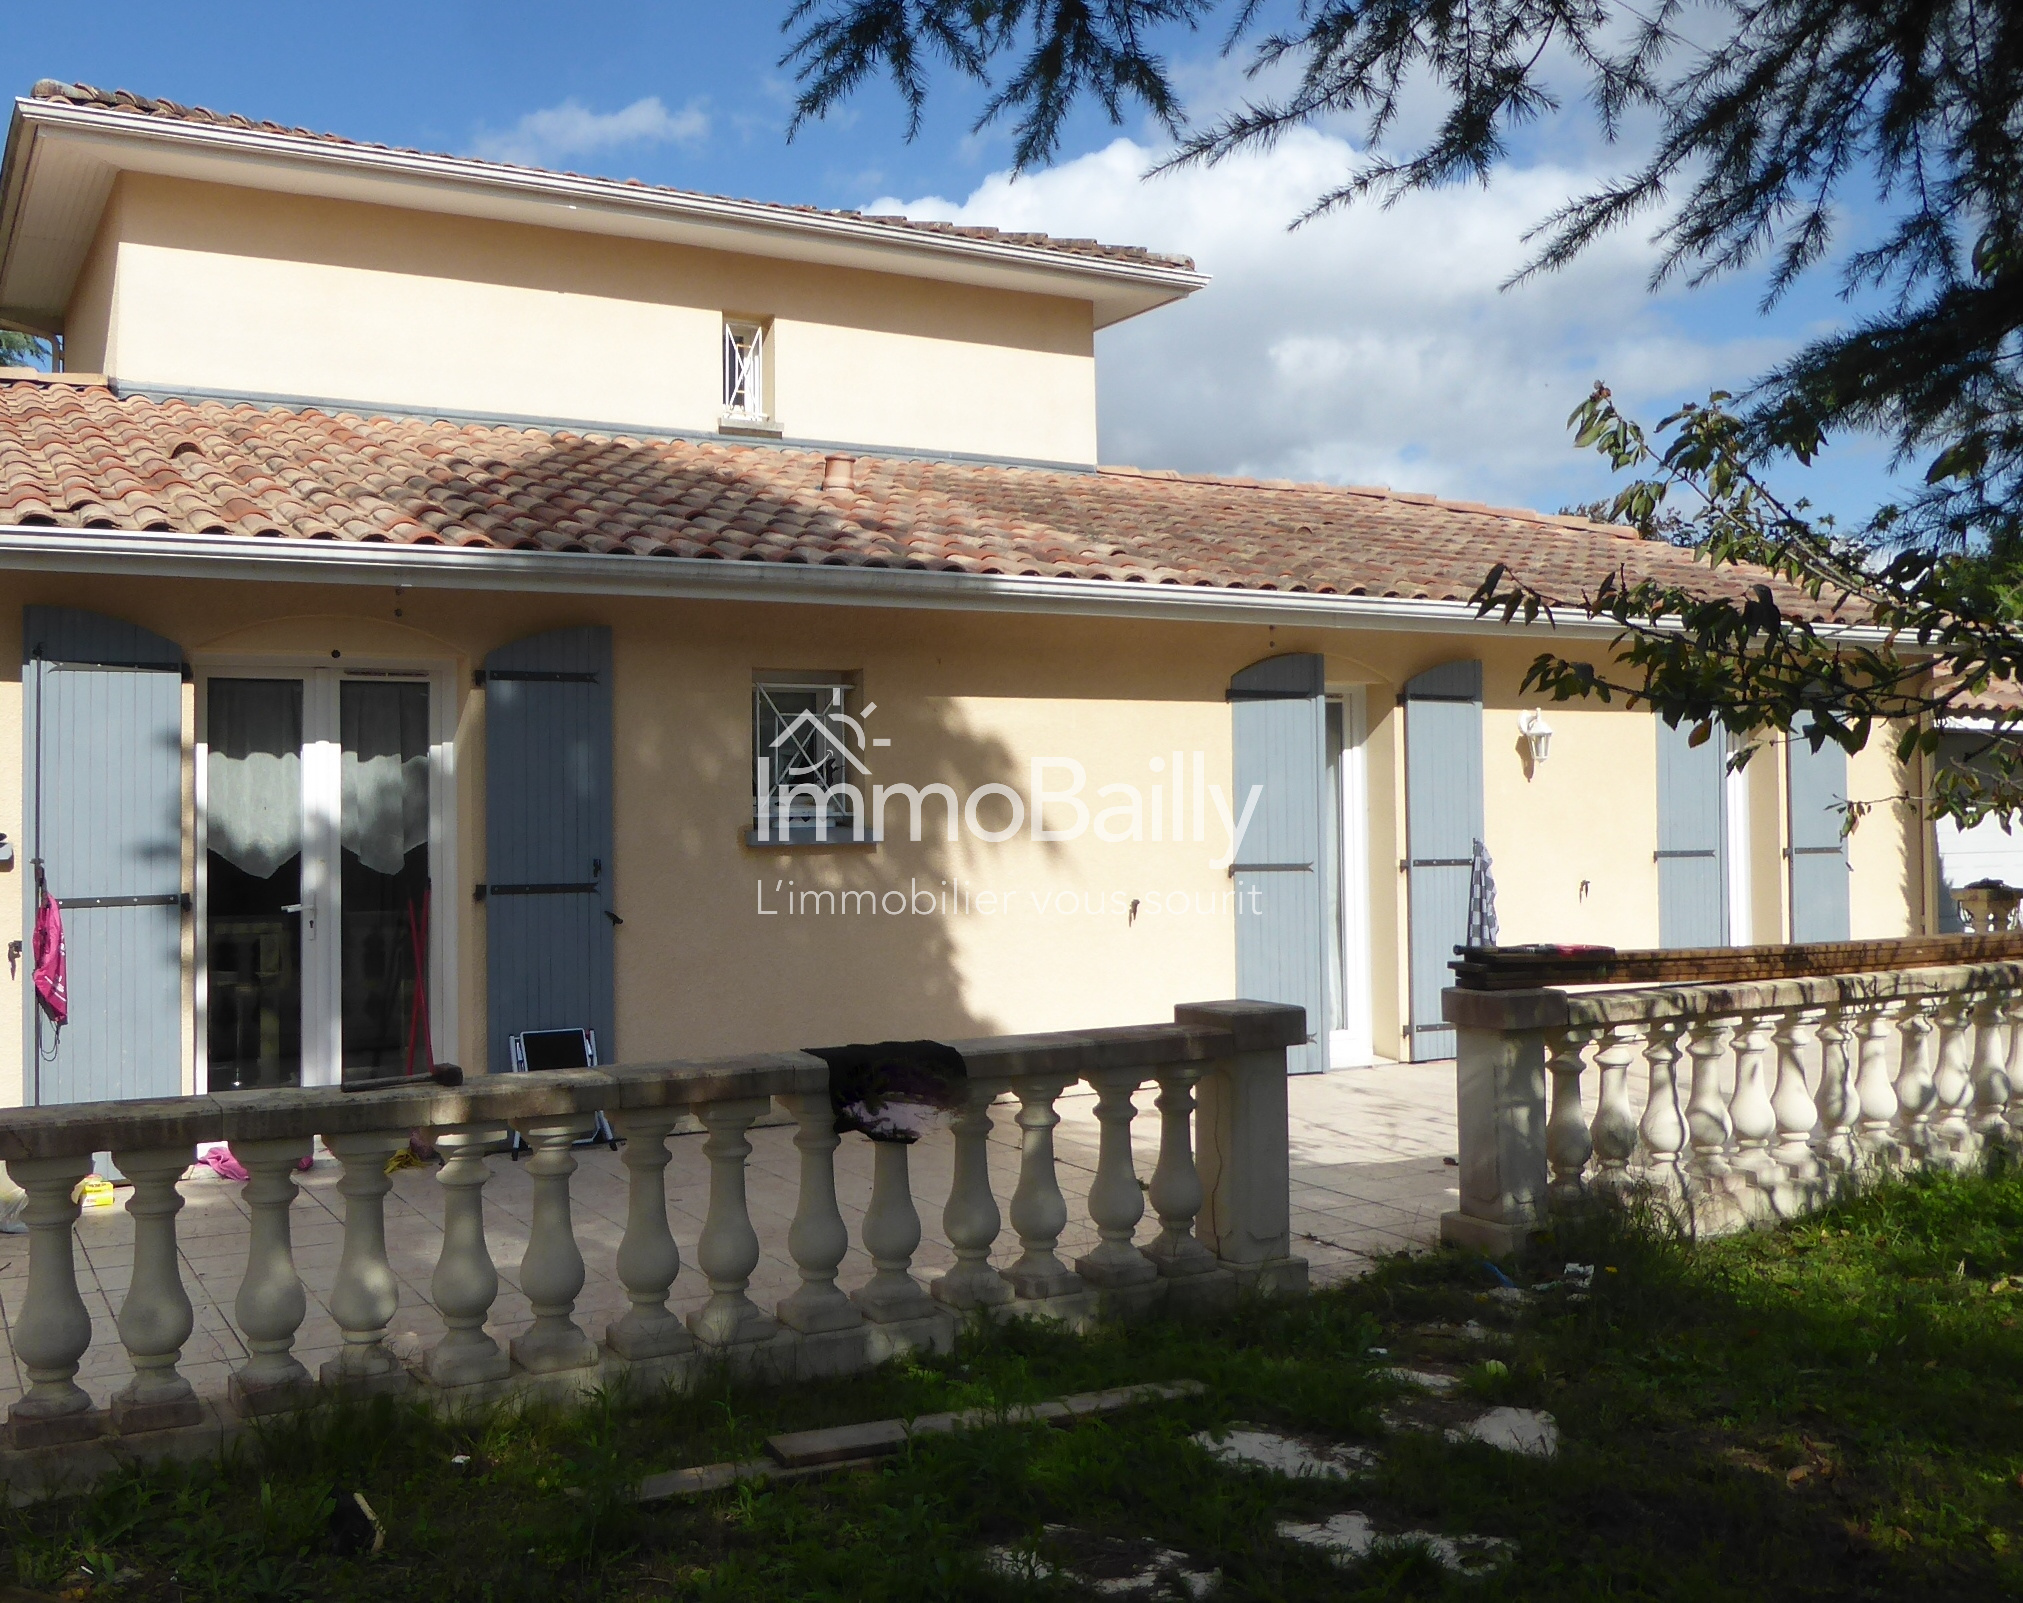 Agence immobilière de IMMOBAILLY